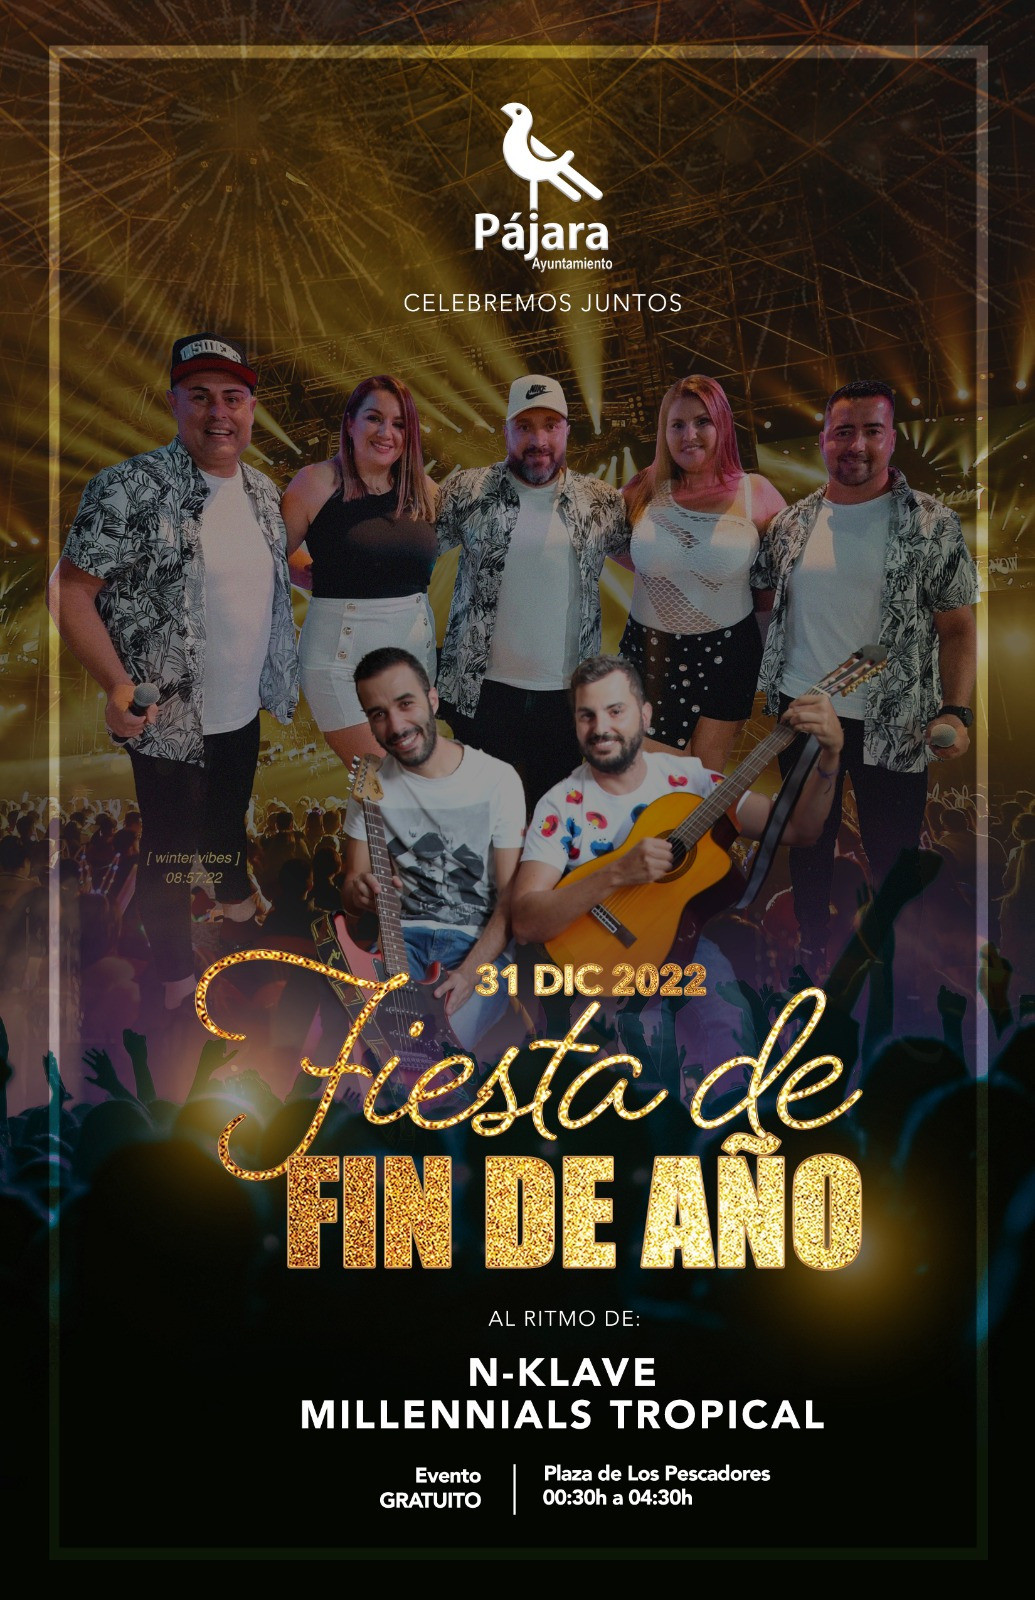 New Years Eve Party in Morro Jable Fuerte Guide